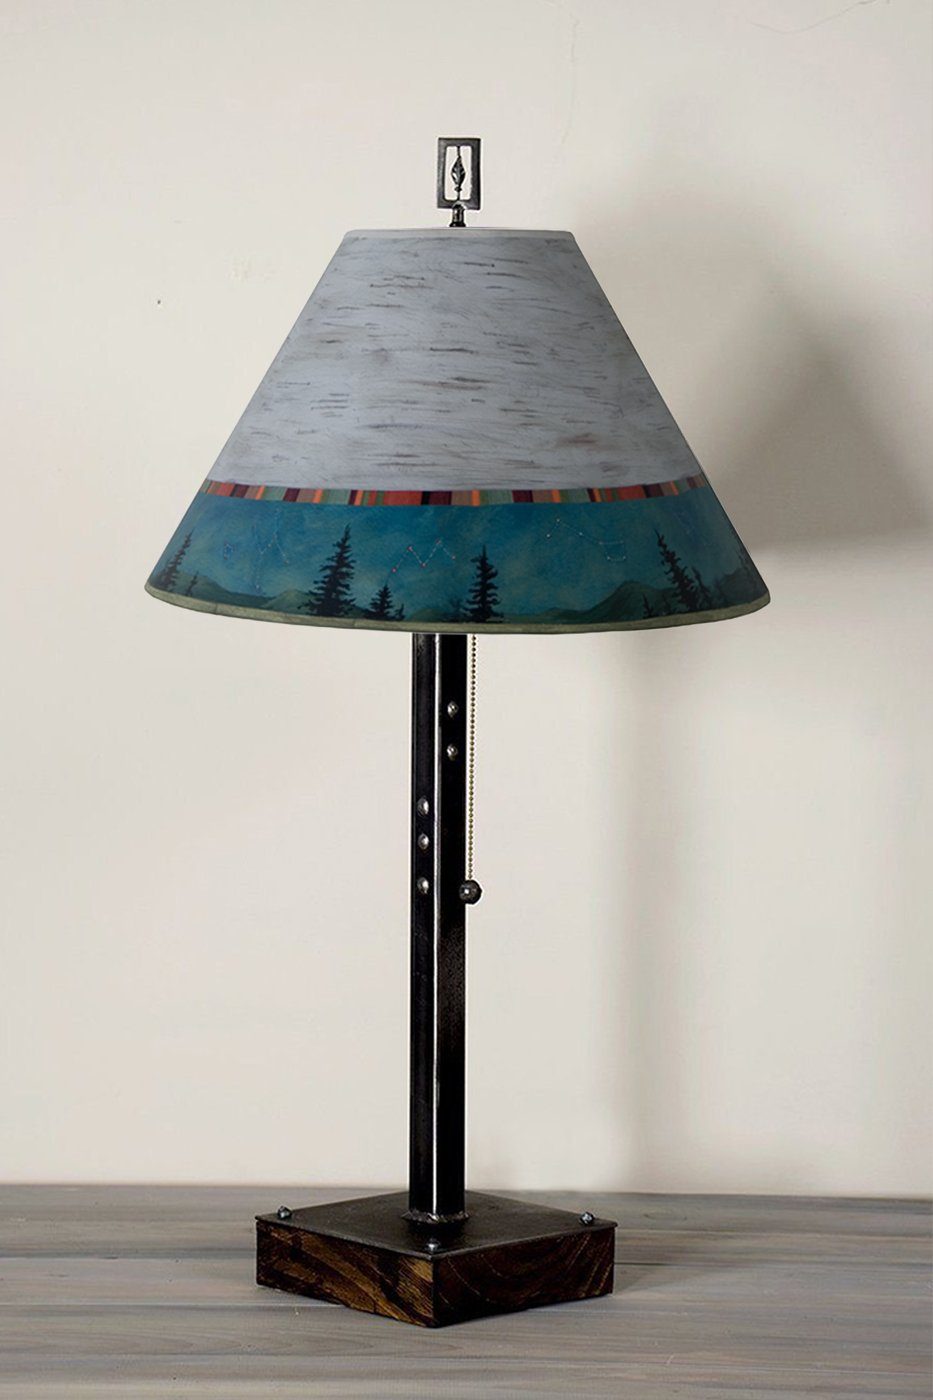 Janna Ugone &amp; Co Table Lamps Steel Table Lamp on Wood with Medium Conical Shade in Birch Midnight